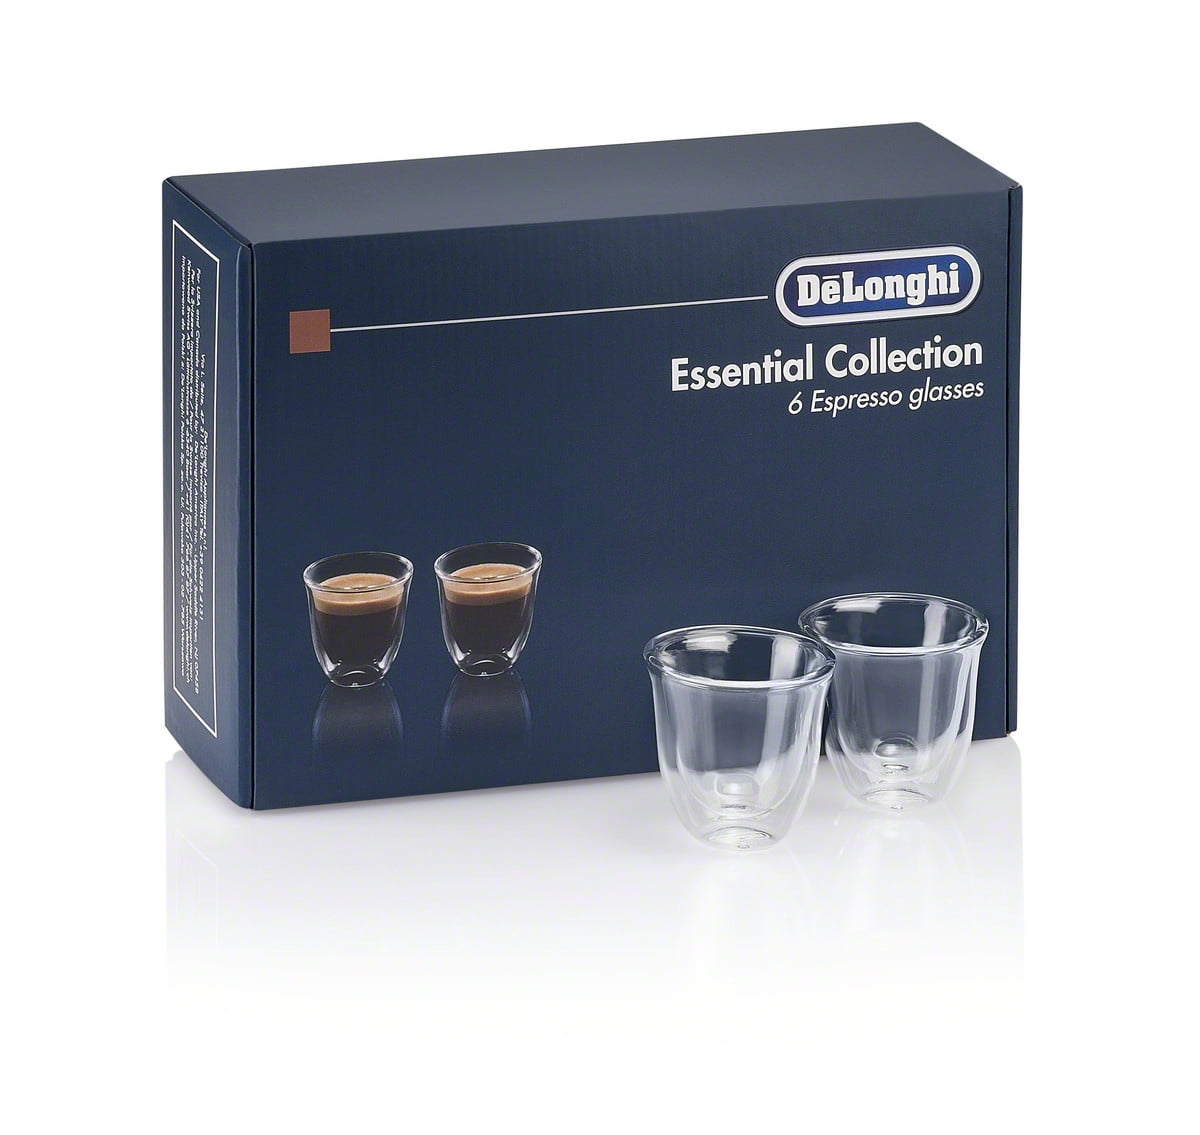 De'Longhi DeLonghi Double Walled Thermo Latte Glasses, Set of  2, 2 Count (Pack of 1), Clear, 330 milliliters: Drinkware Sets: Espresso  Cups